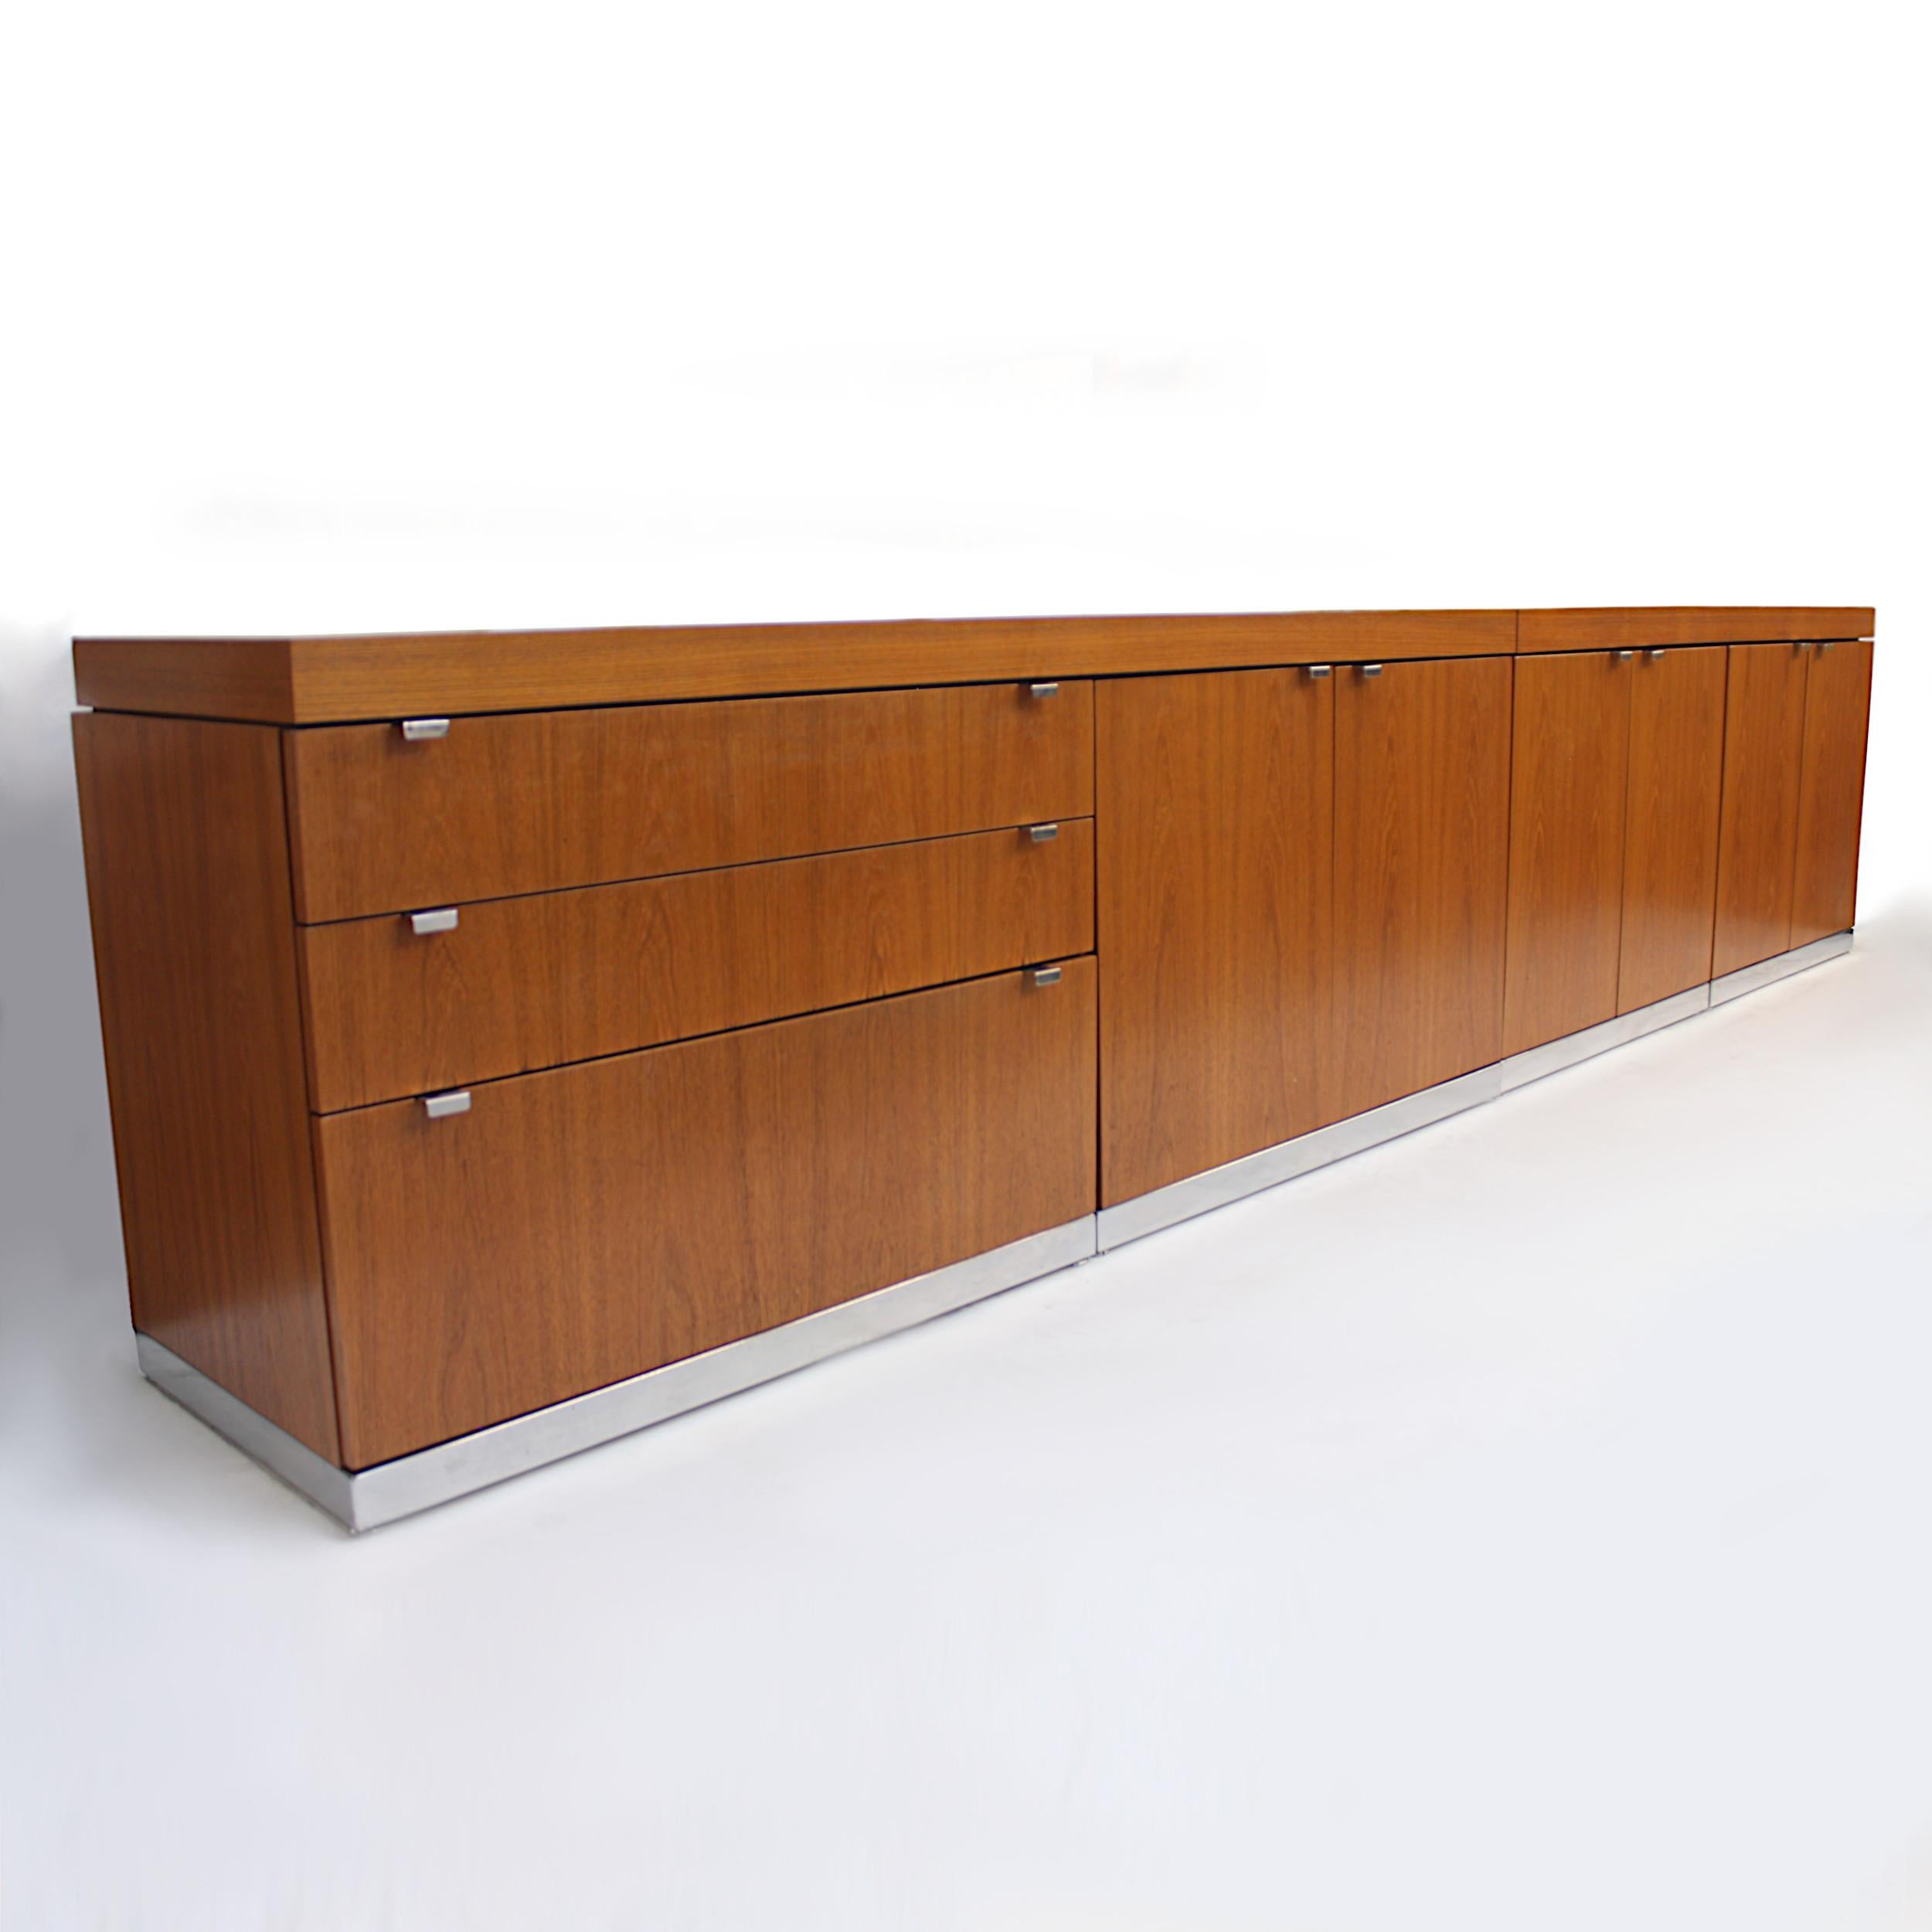 Massive teak credenza by John Geiger for IIL (later Herman Miller). Credenza features beautiful book-matched grain teak veneer, chrome pedestal bases, chrome hardware and a modular setup allowing it to be two separate pieces (5 & 6 feet) or one